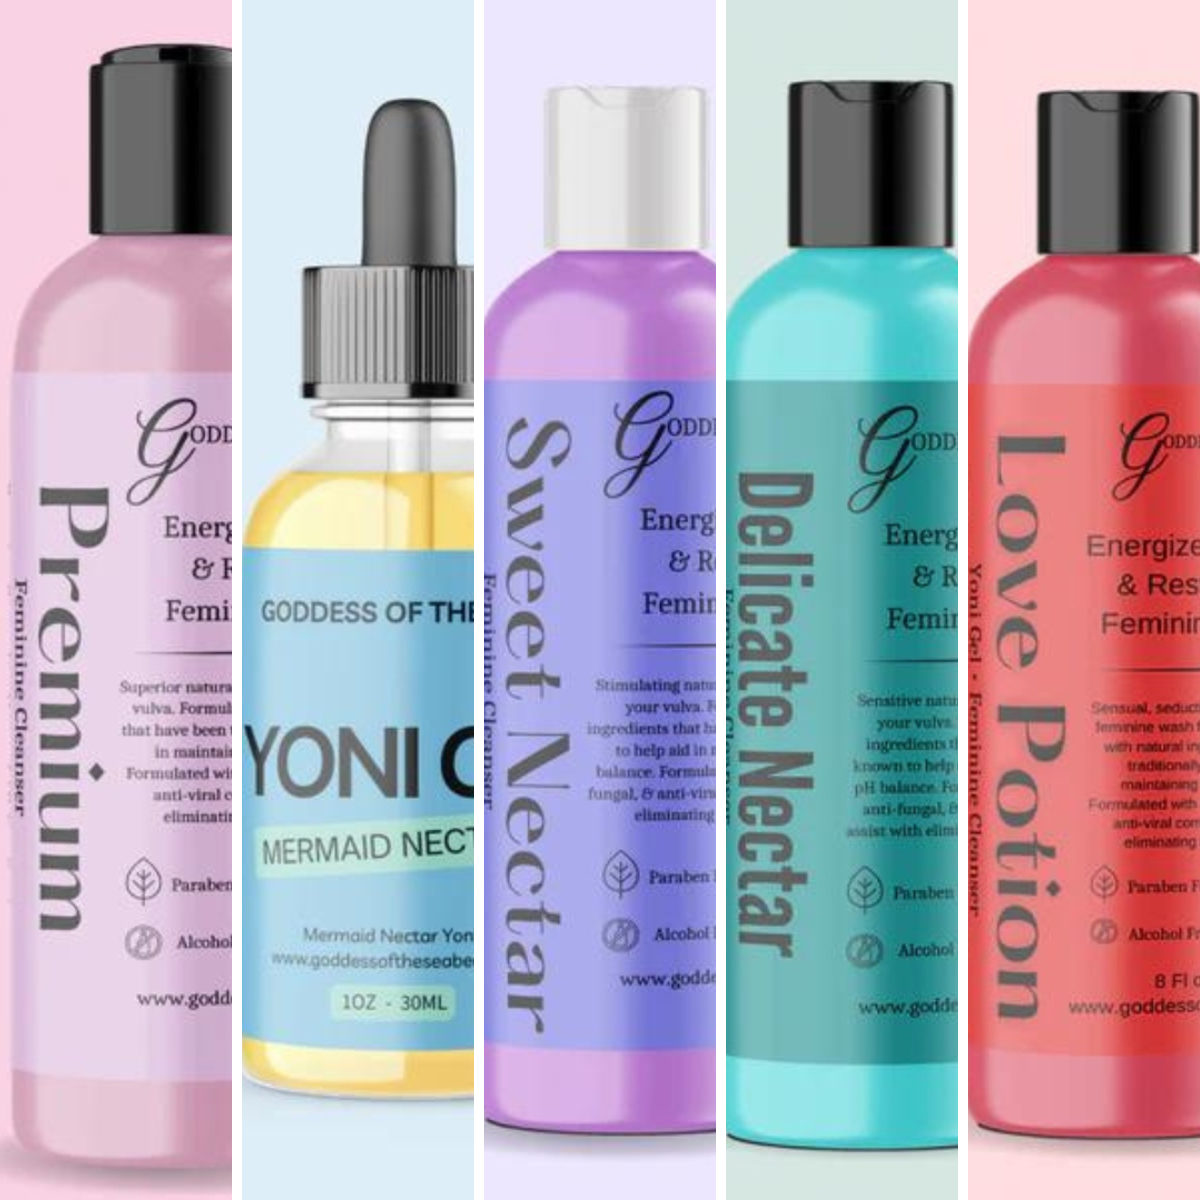 A group of feminine care wash bottles for your yoni.